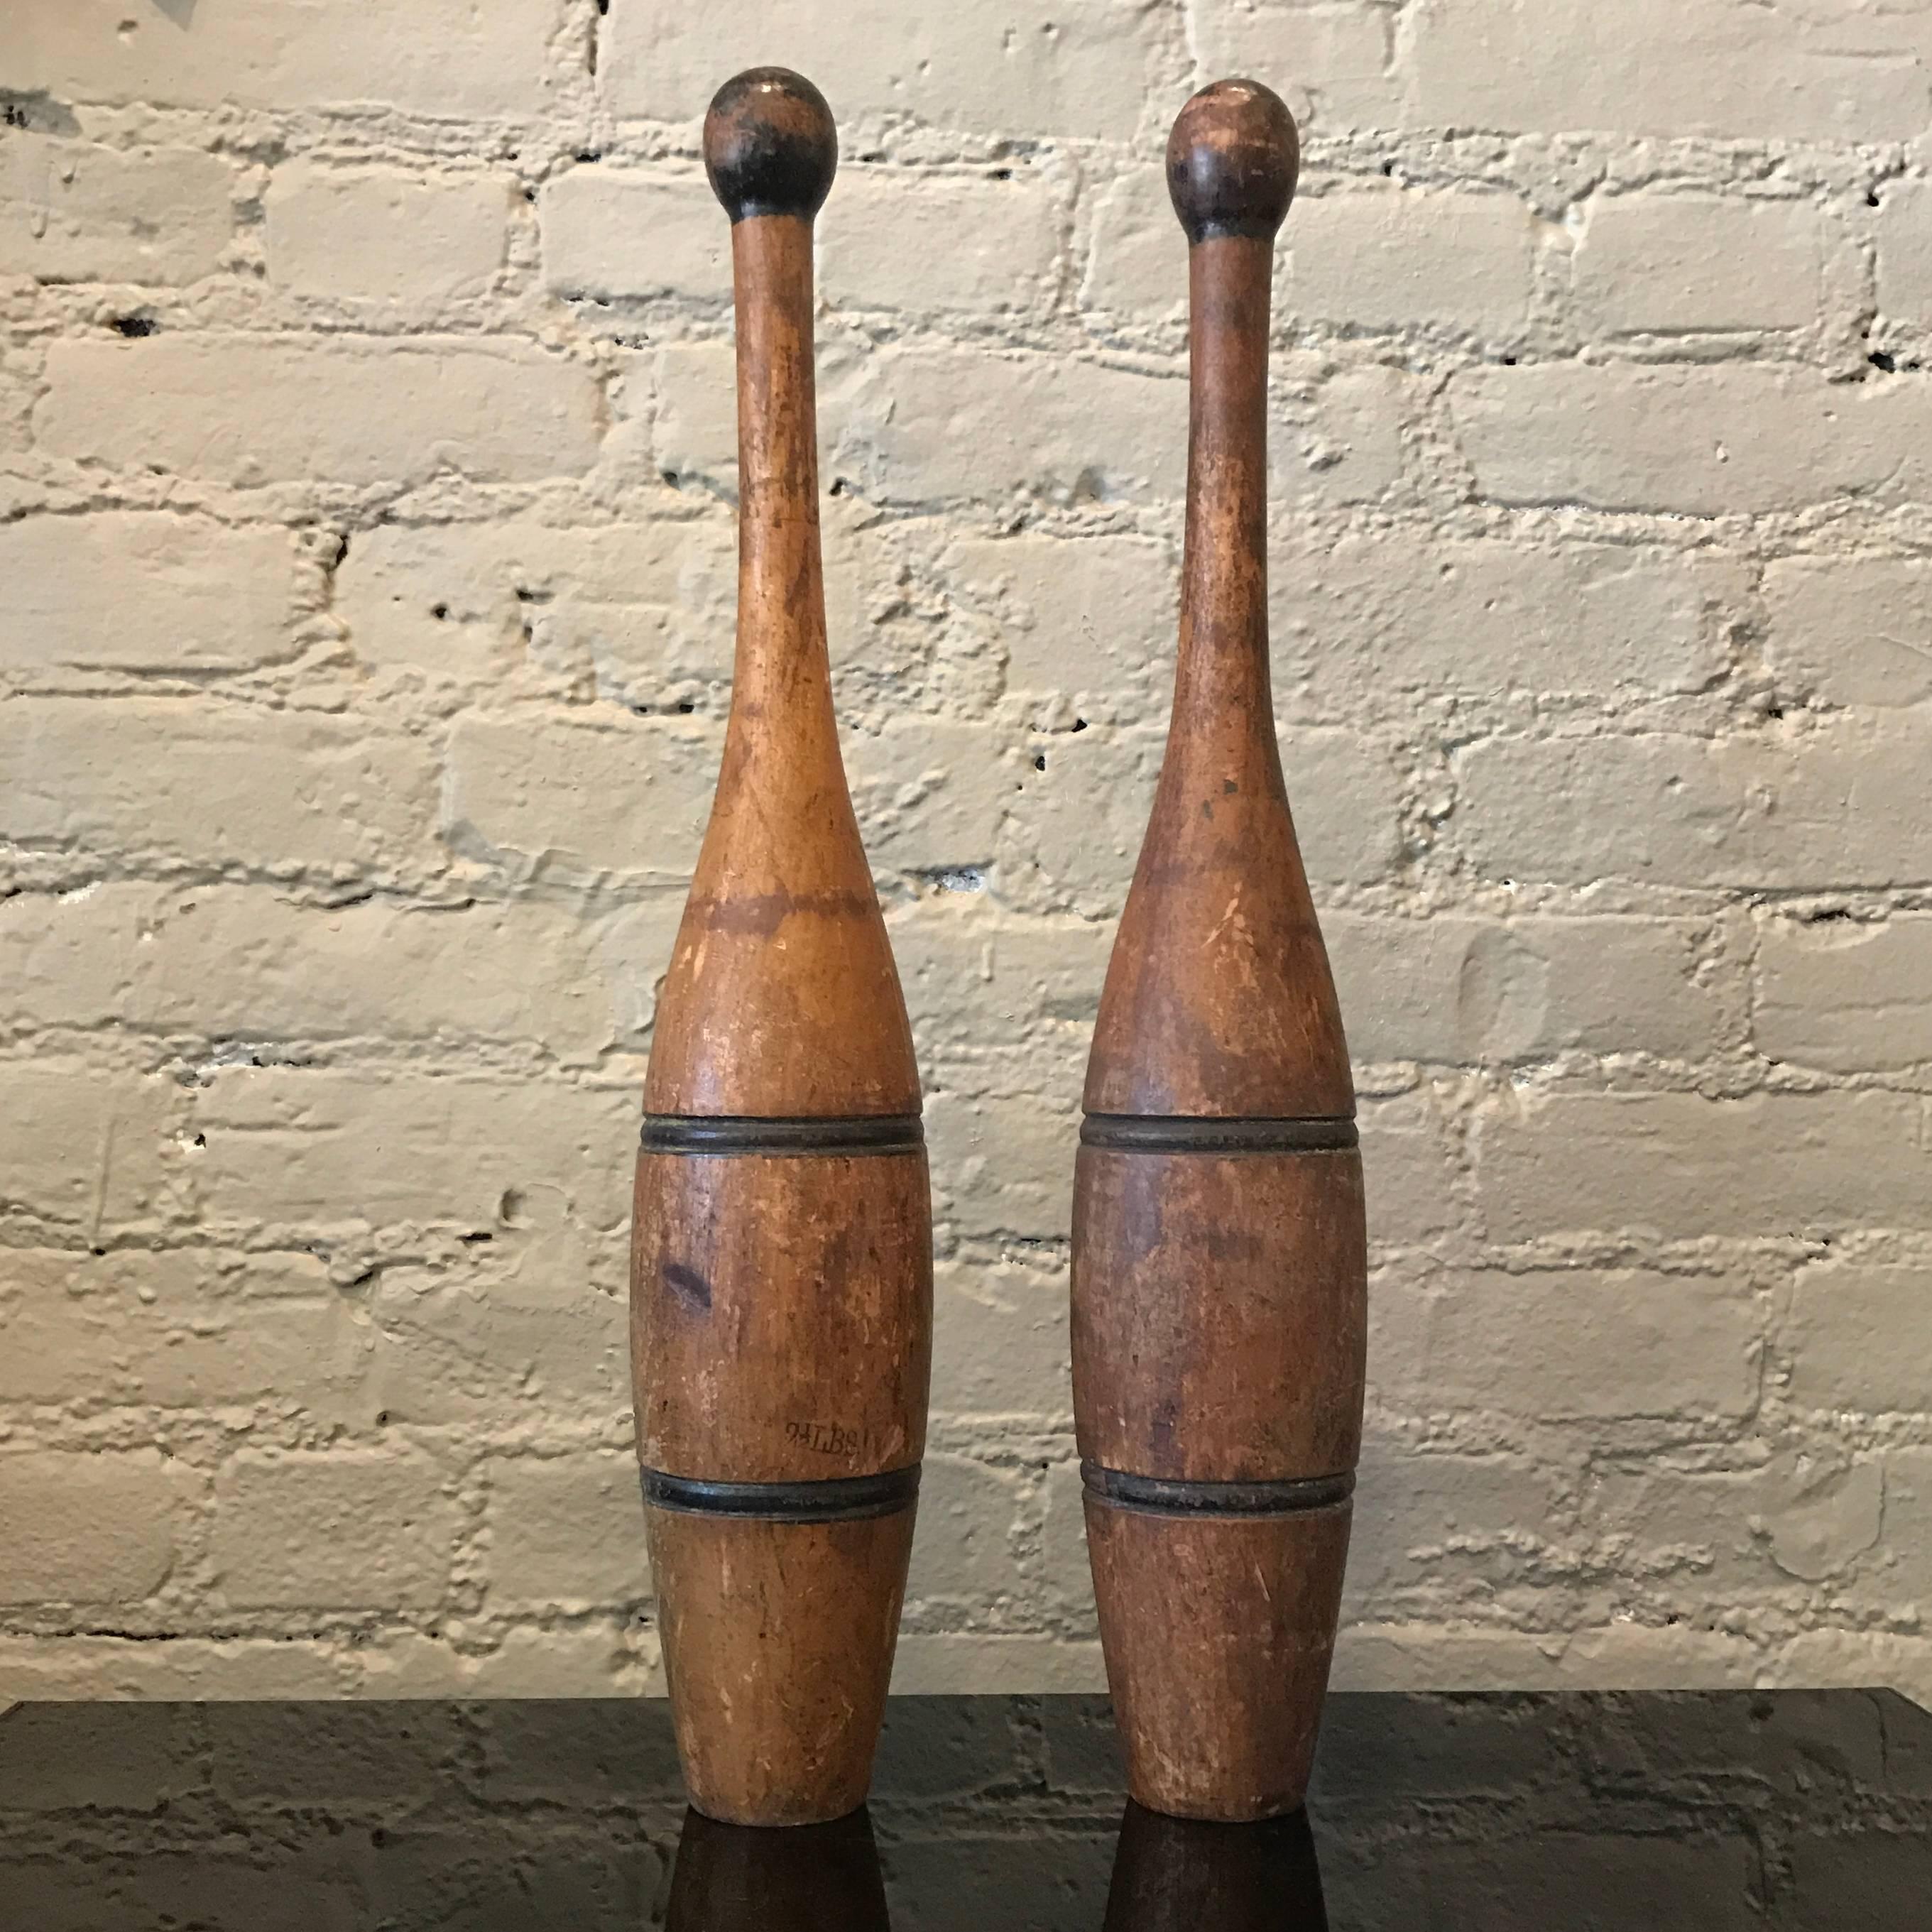 Pair of early 20th century, turned maple wood, striped, juggling pins or “Indian club” feature beautiful, well worn patina.